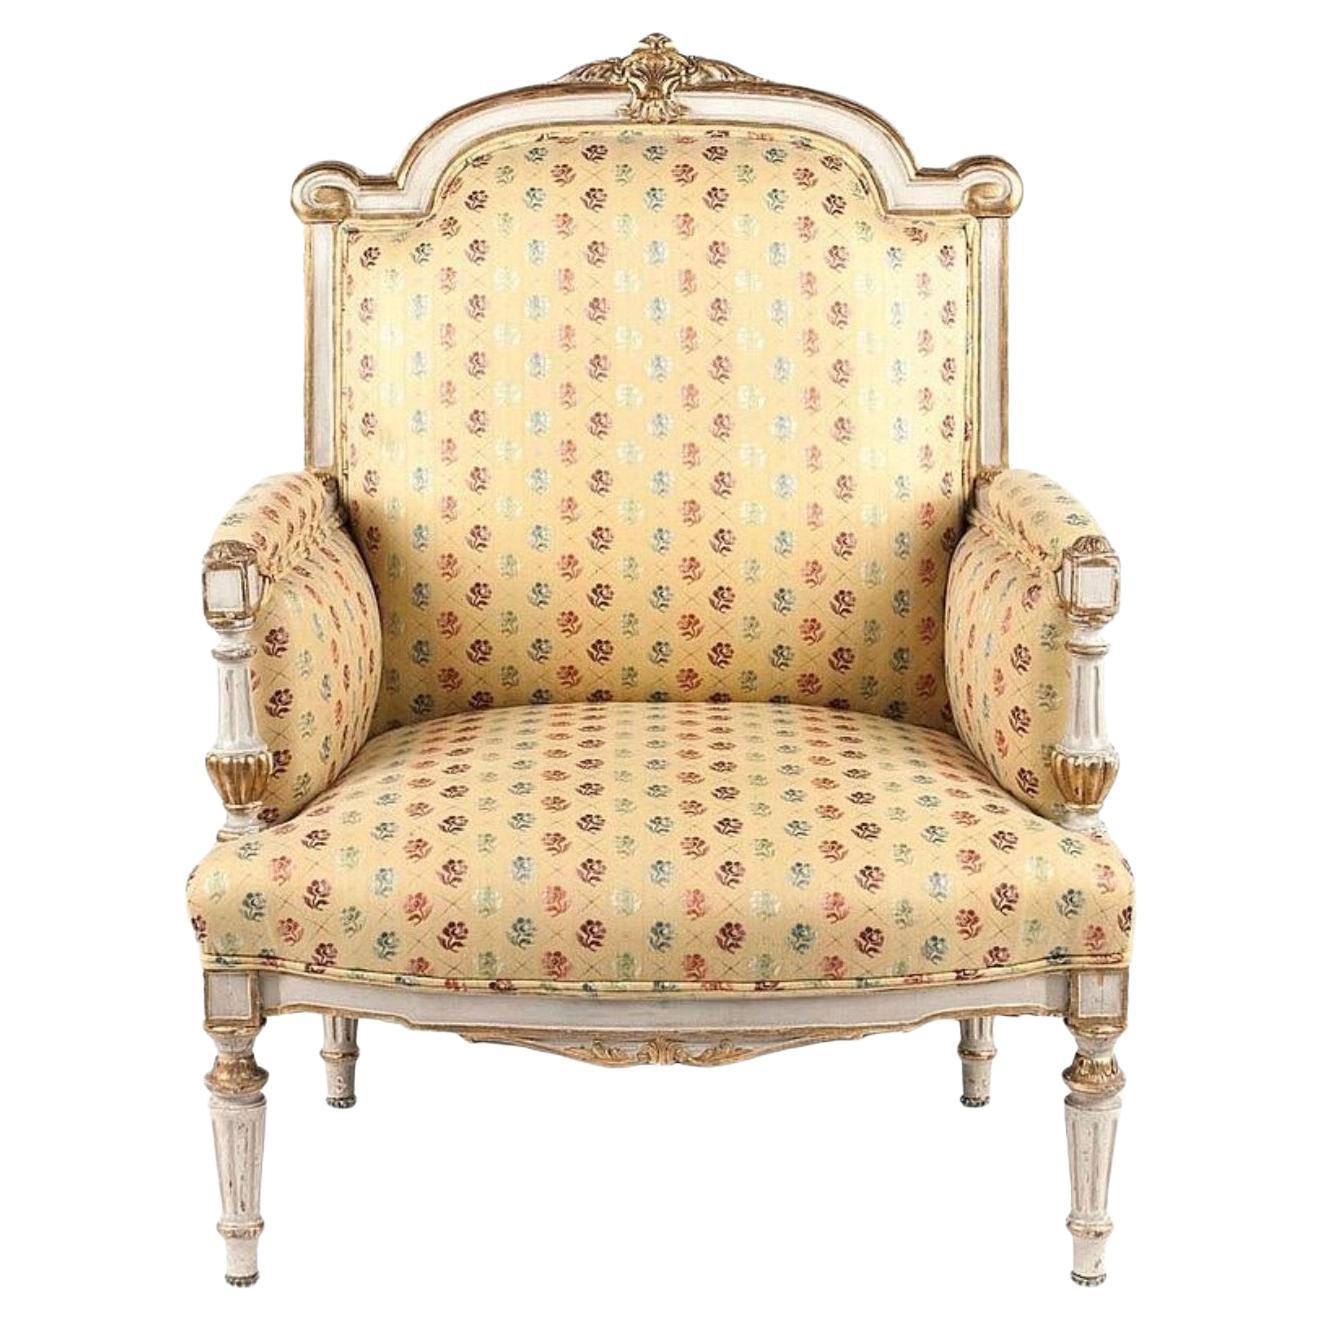 Italian Painted And Parcel Gilt Marquise Armchair, 19th Century